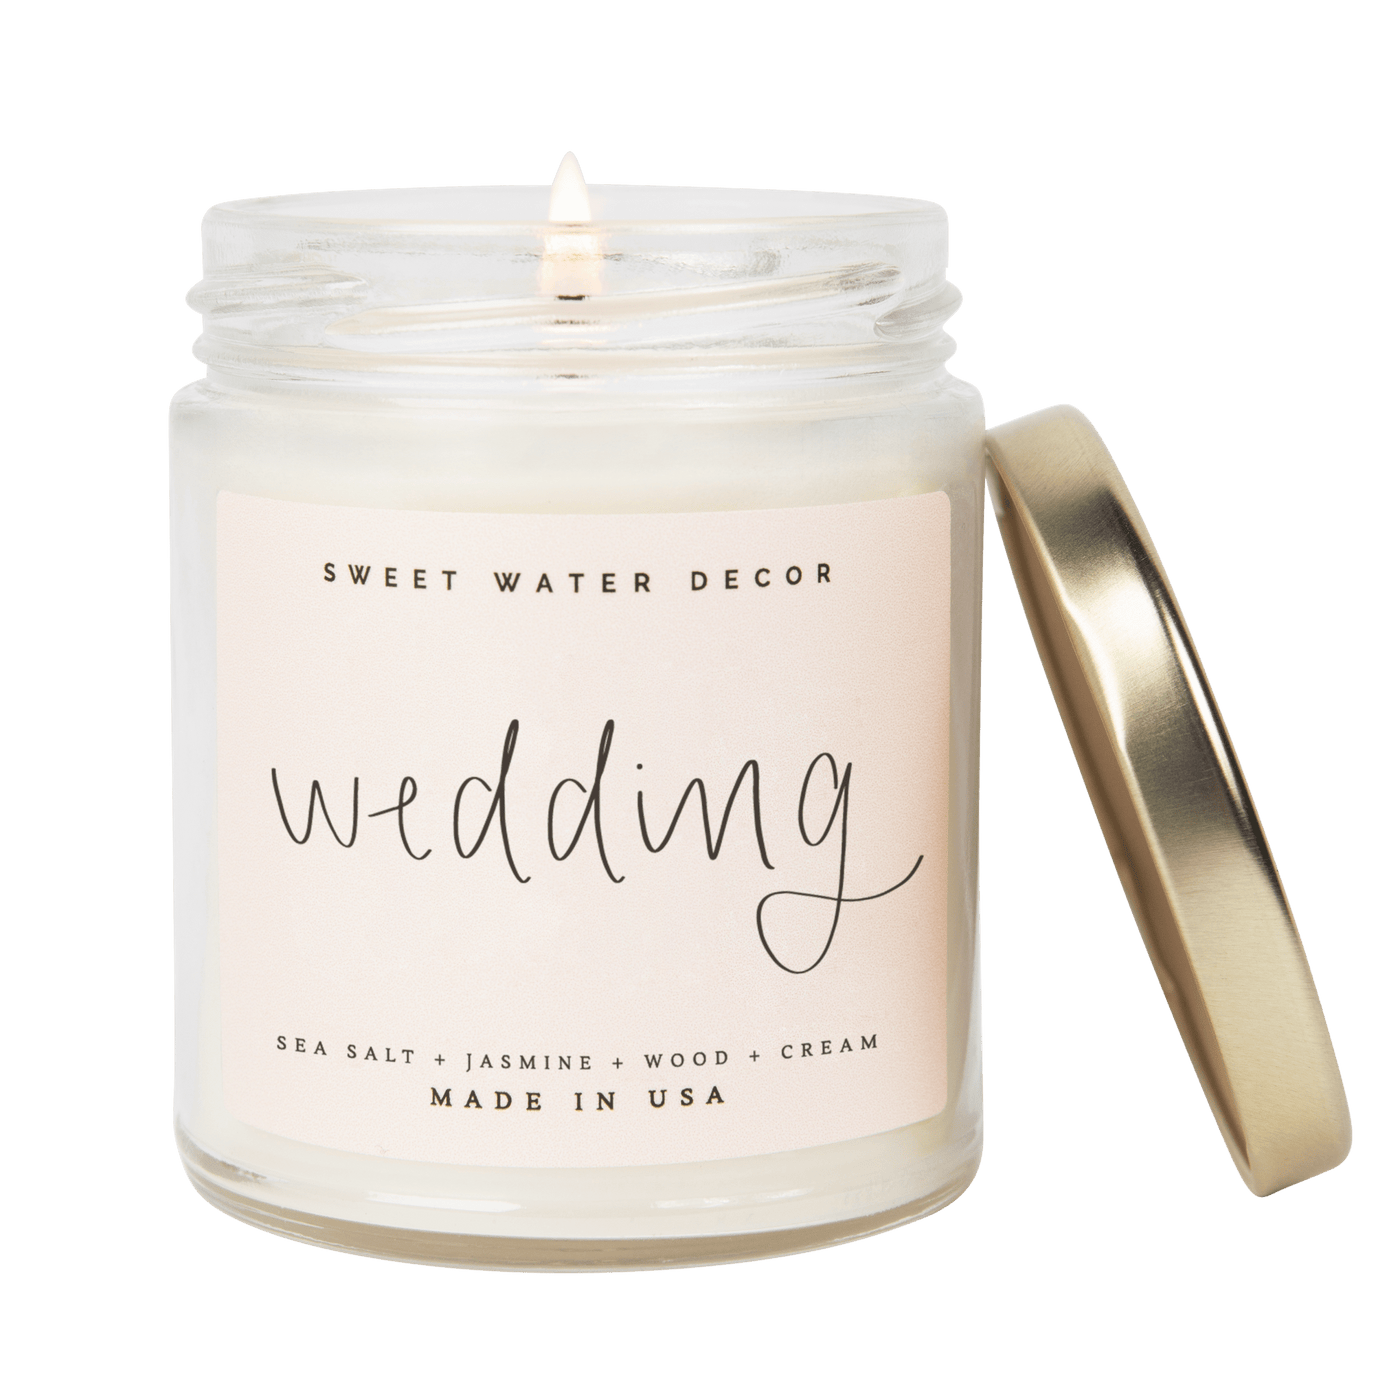 Wedding Soy Candle - Clear Jar - 9 oz - Sweet Water Decor - Candles